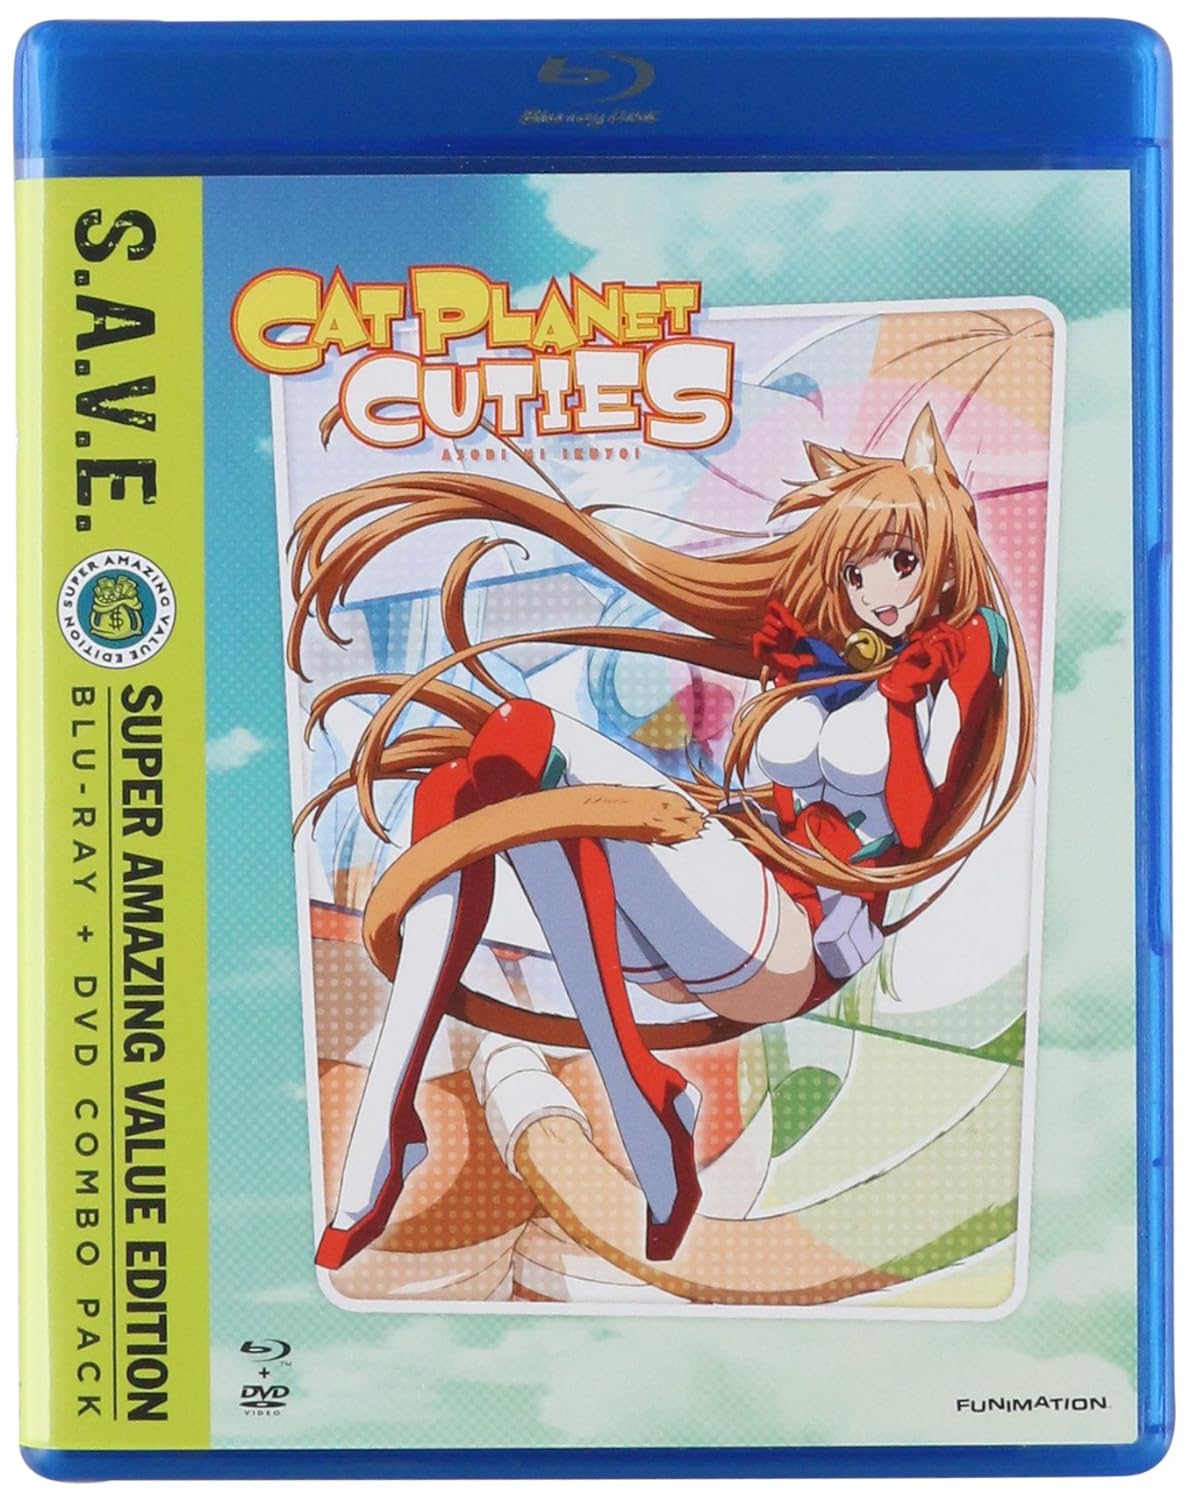 Cat Planet Cuties Complete Series (S.A.V.E. Edition)